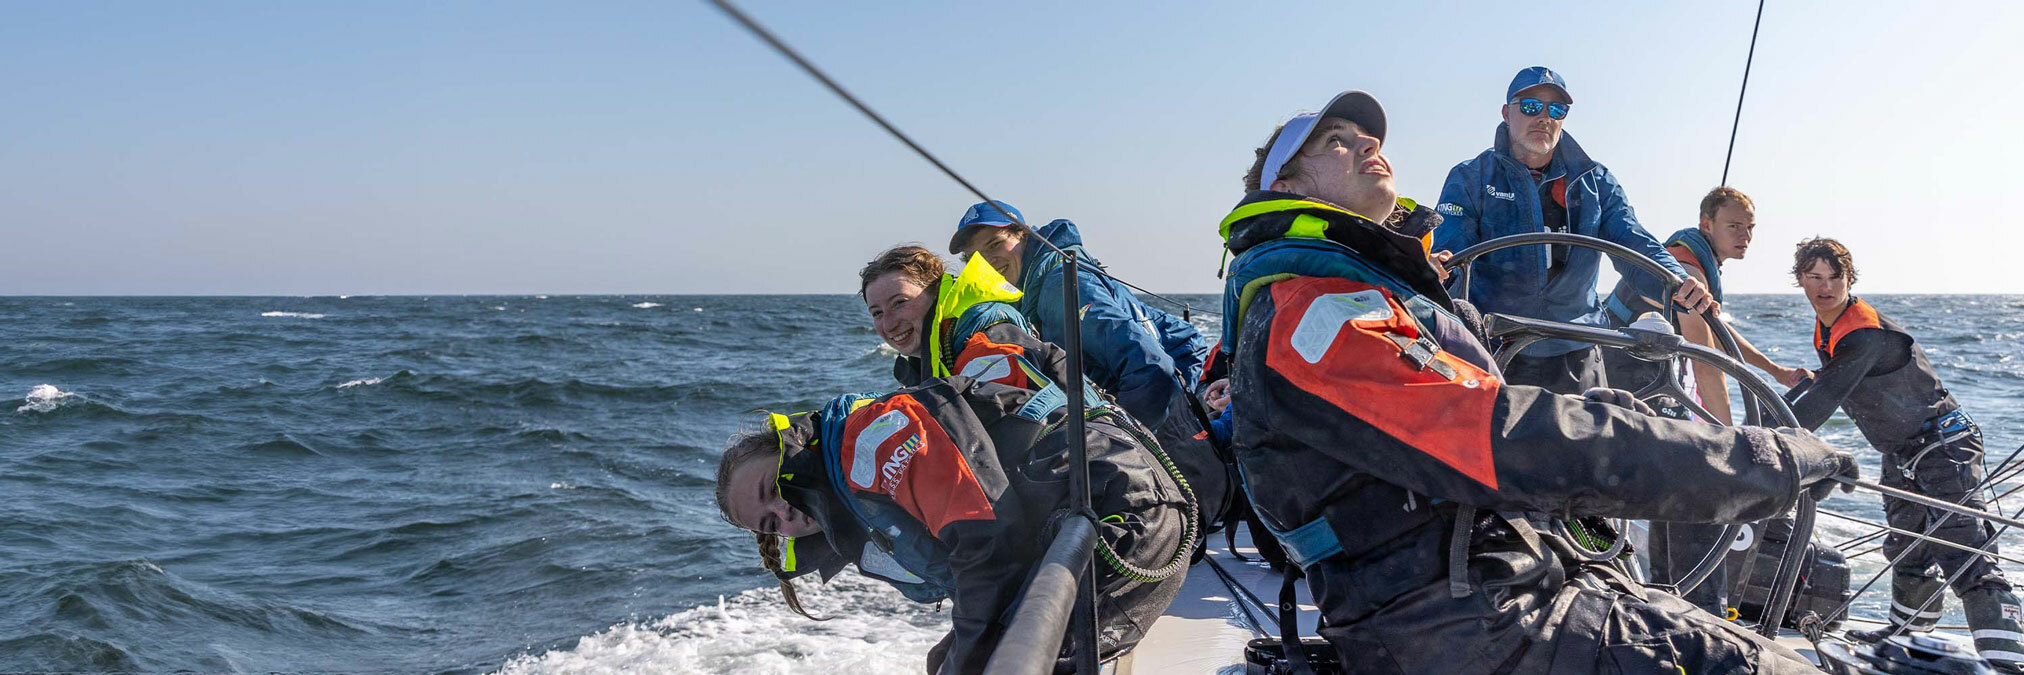 Gill Marine Official Rest of the World Store - Sailing jackets, clothing  and accessories